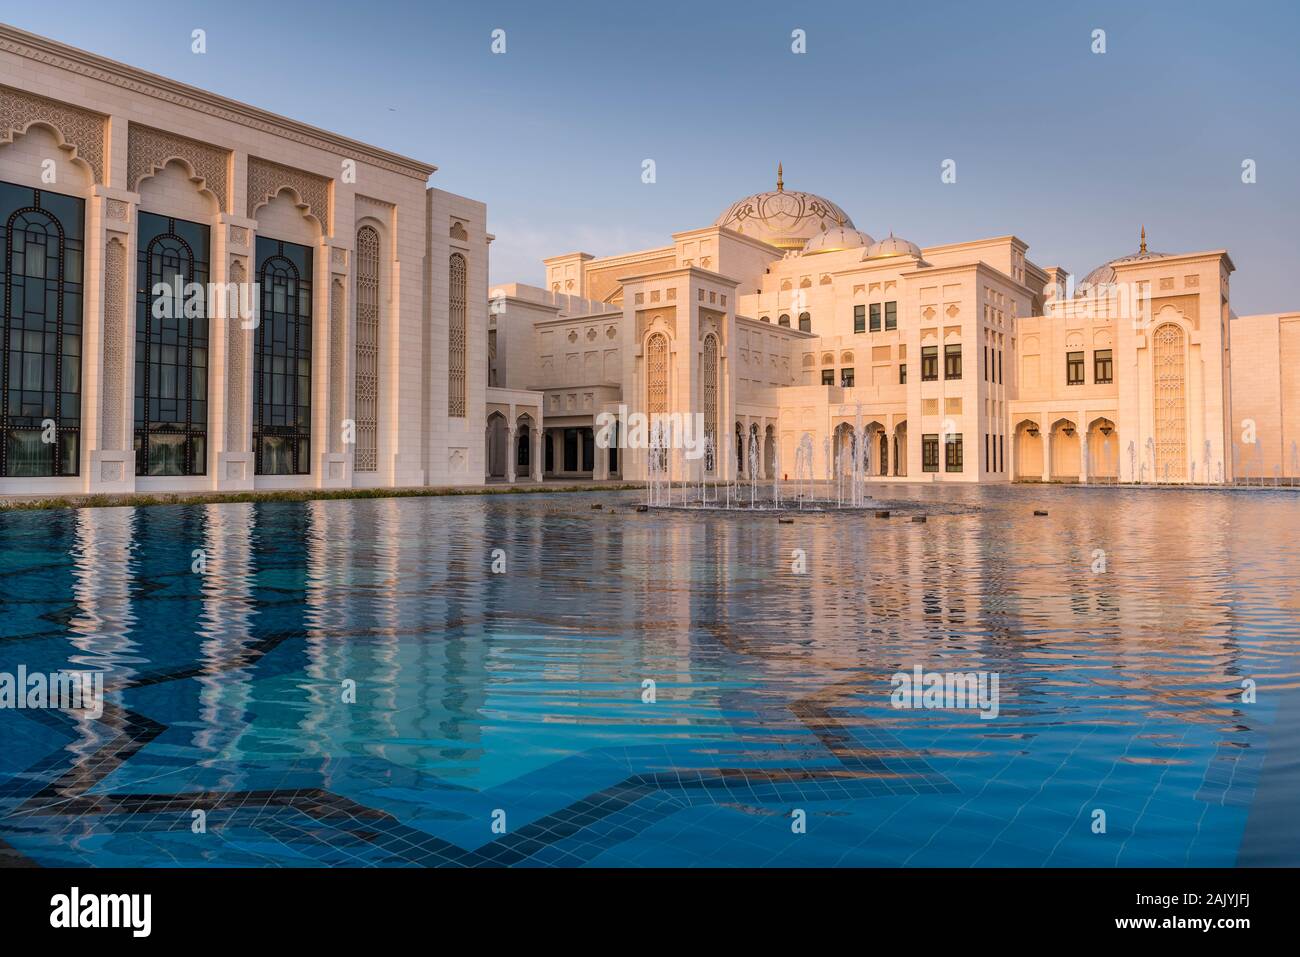 Abu Dhabi: Qasr Al Watan (Palace of the Nation), Presidential Palace in Abu Dhabi, outdoor, exterior, at sunset, reflection in water, nobody Stock Photo